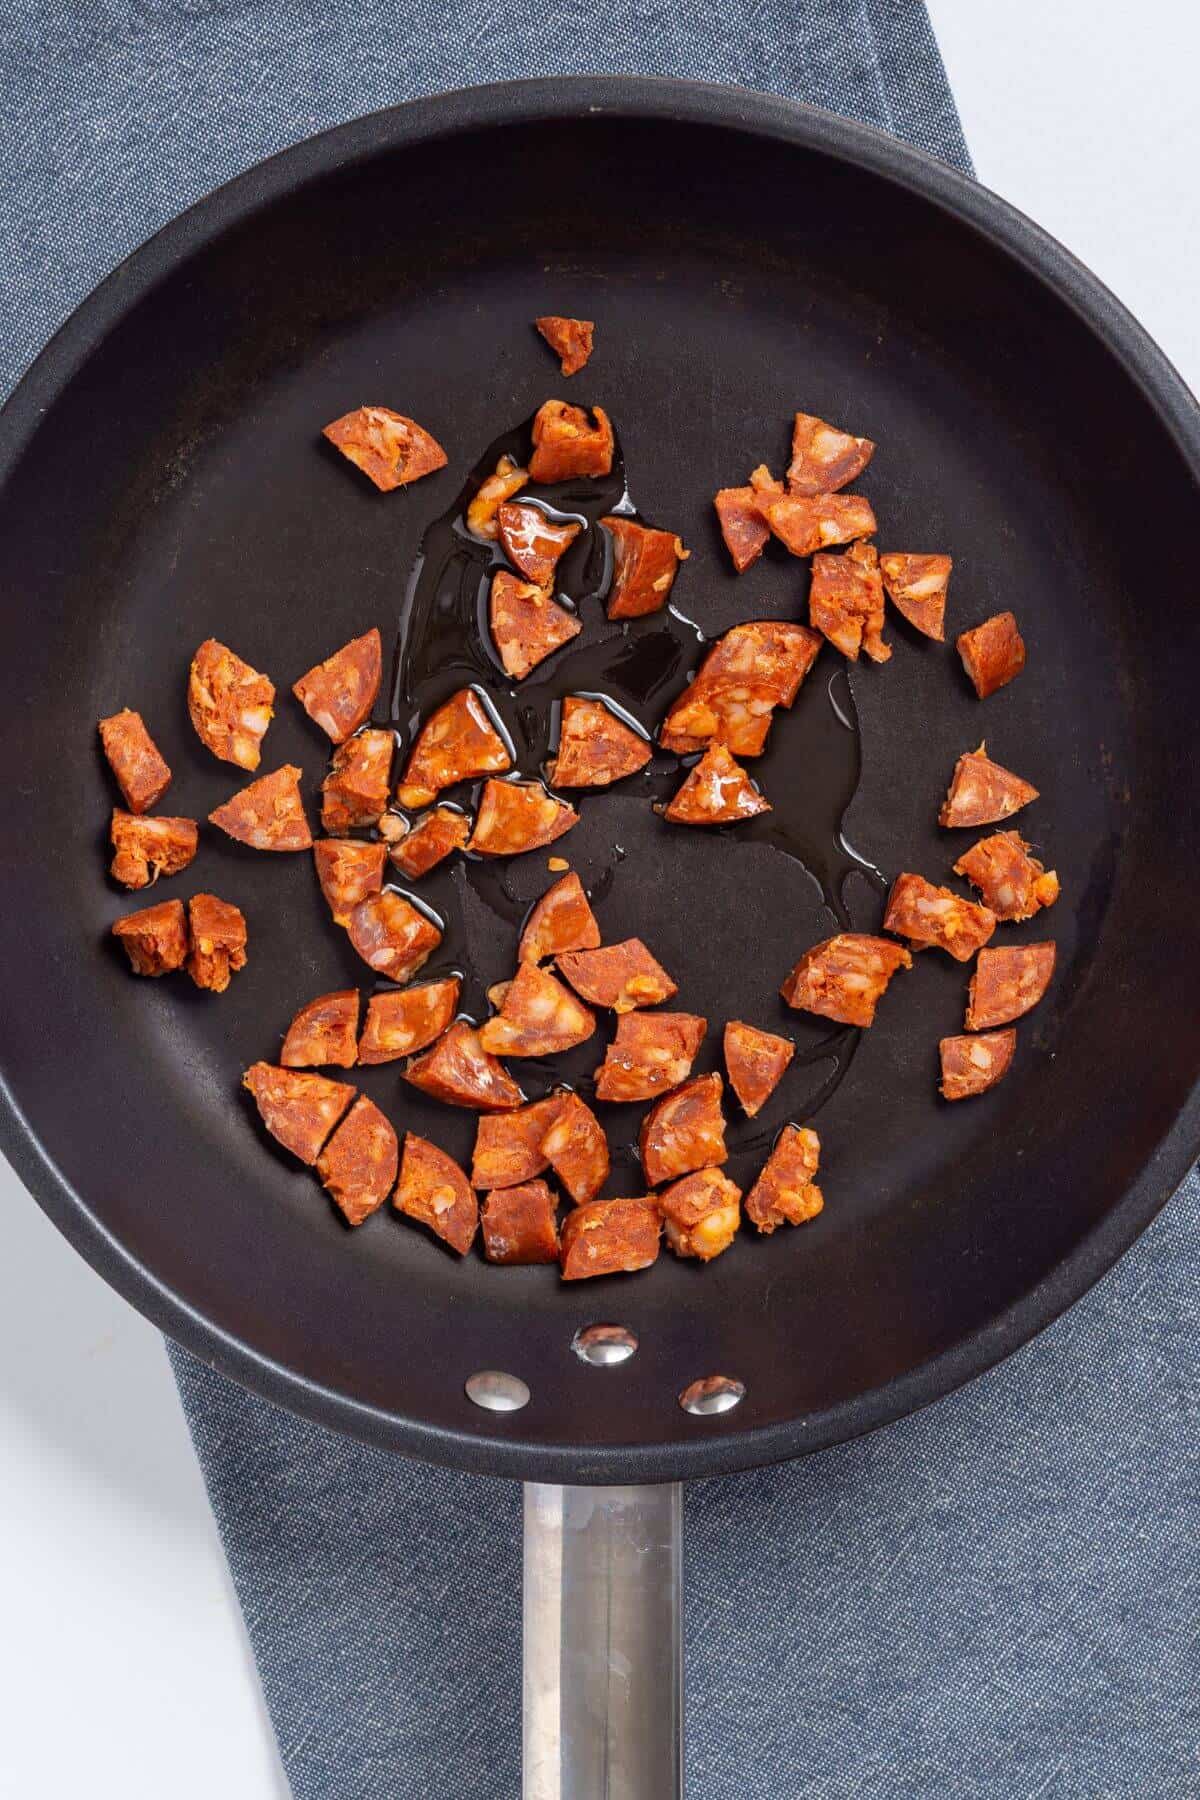 Chorizo pieces cooking in skillet.